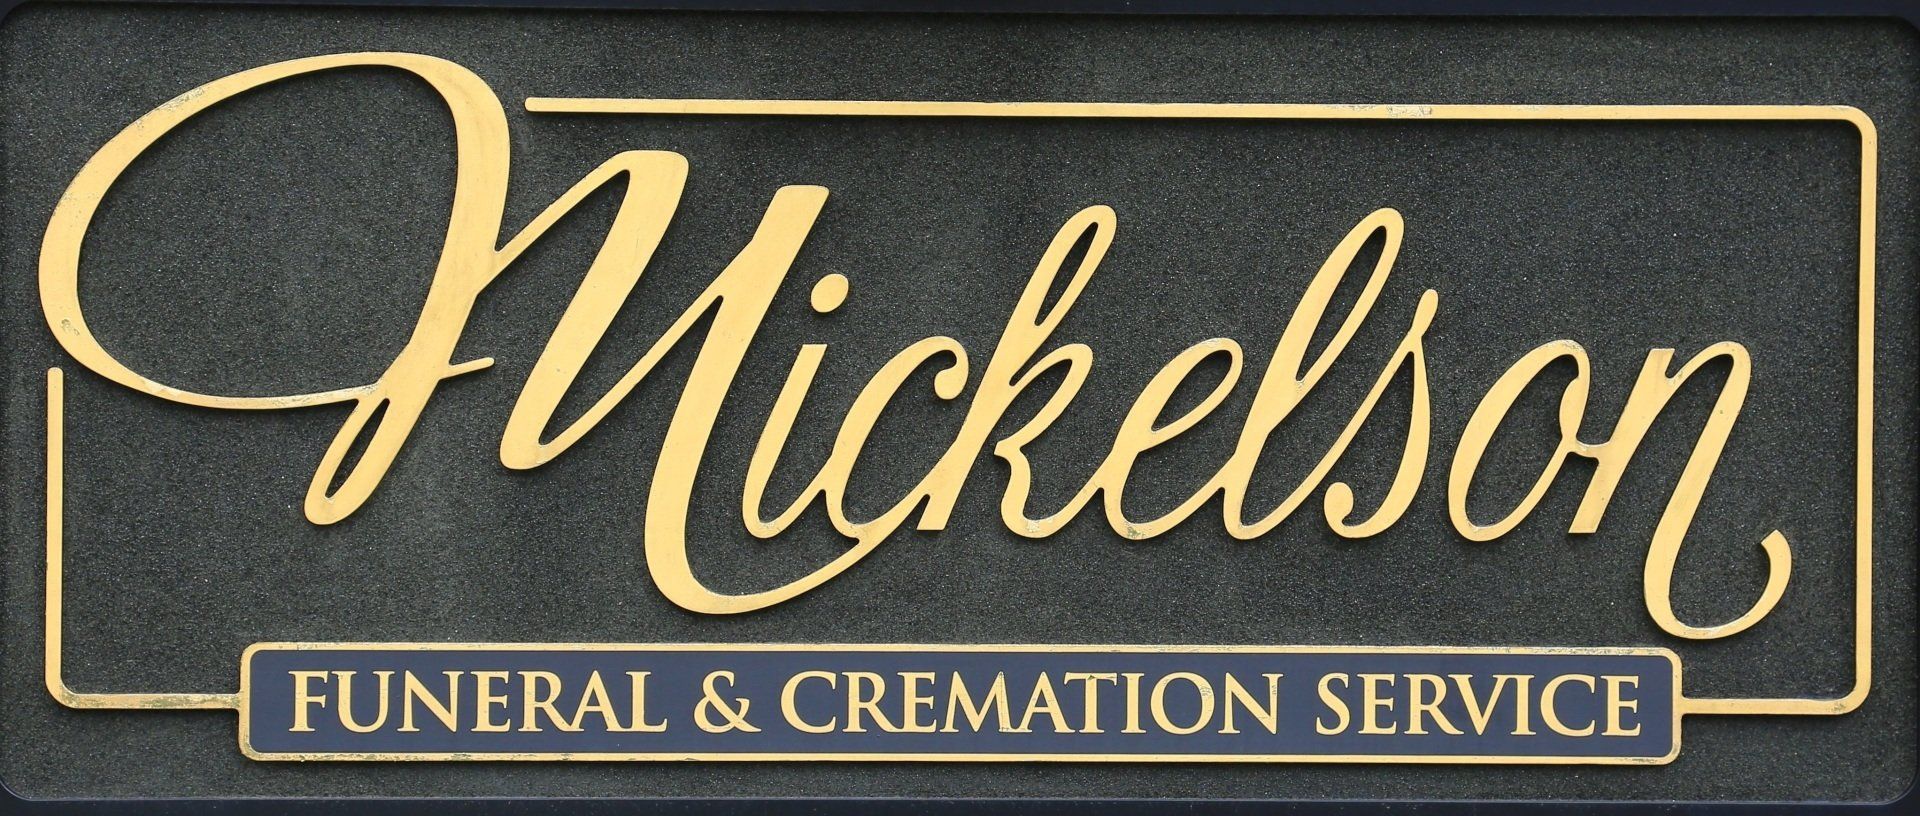 Mickelson Funeral & Cremation Service